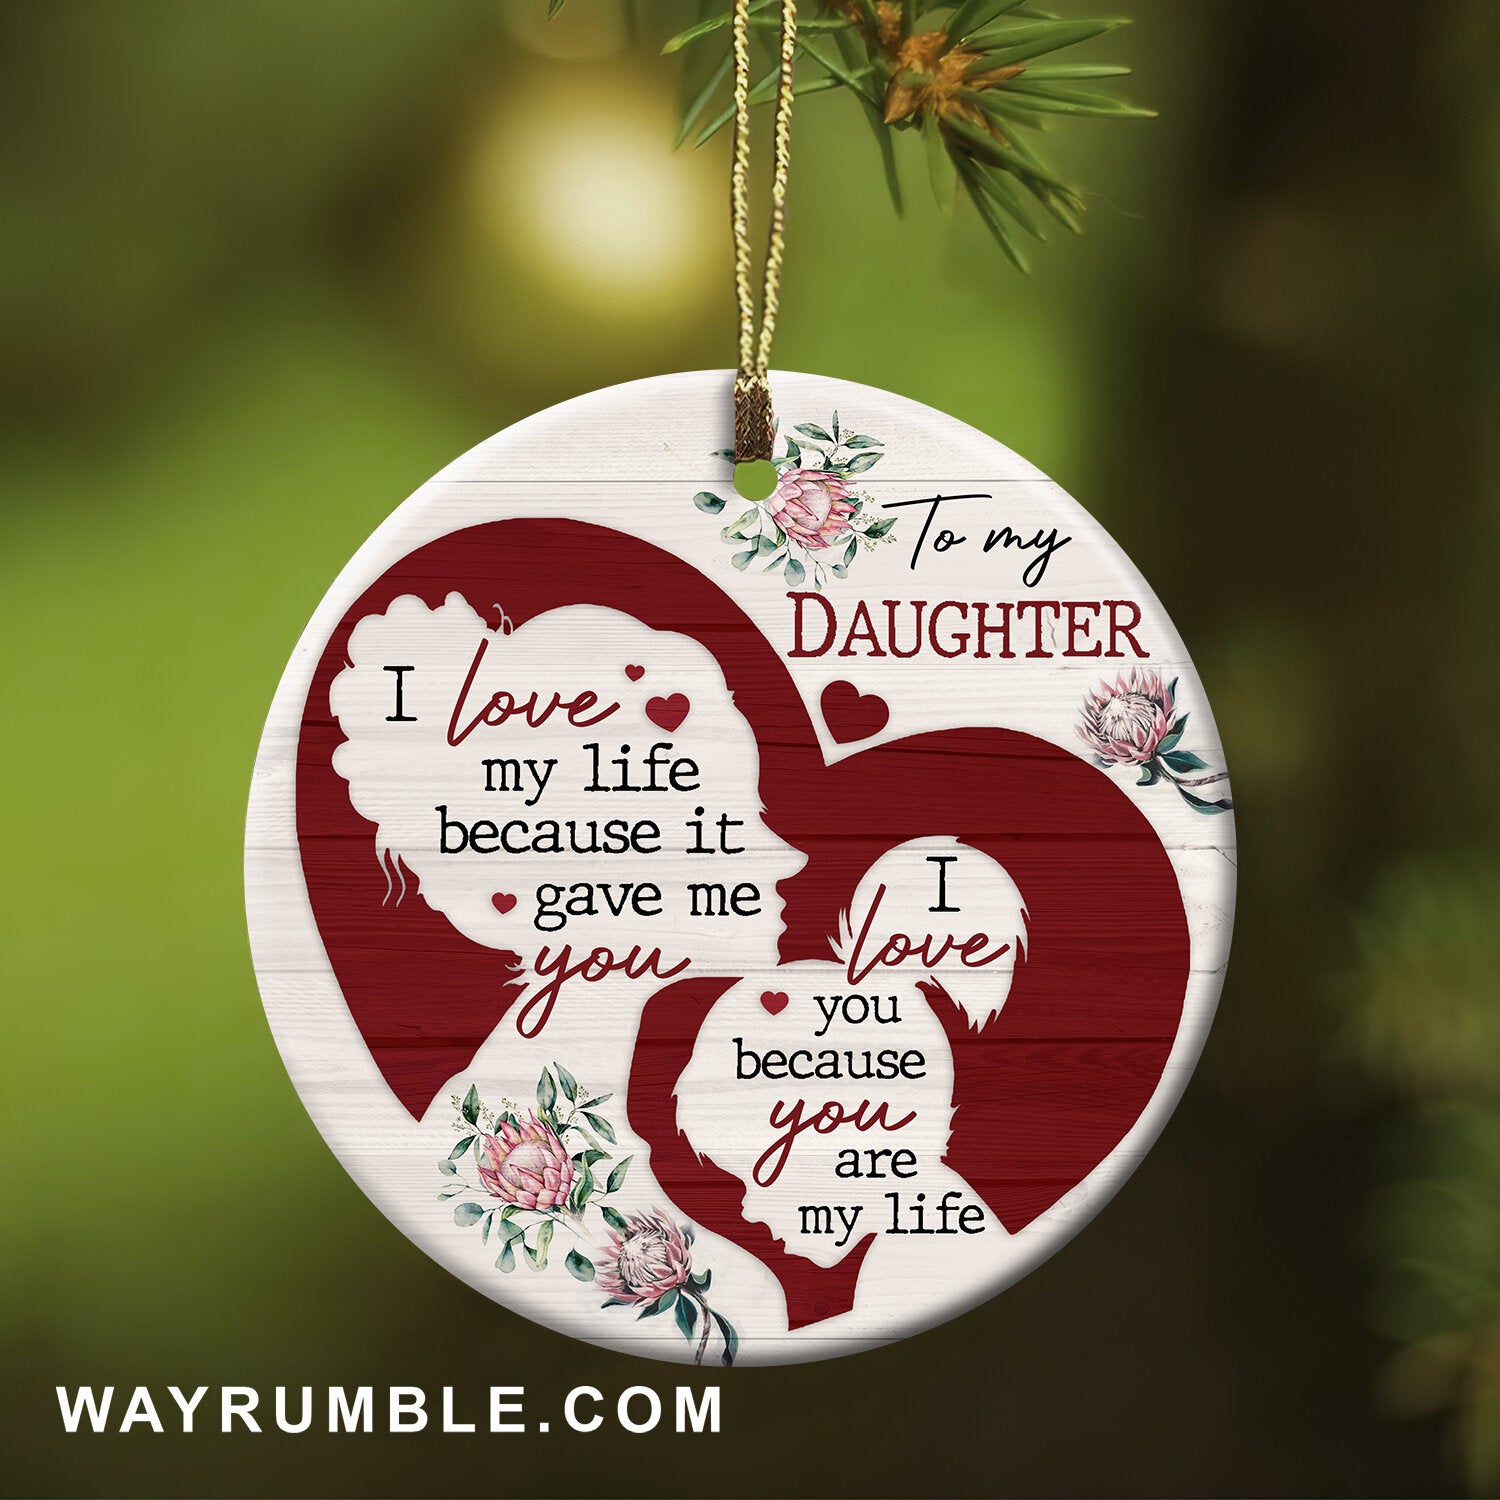 Mom to daughter in a heart - I love you because you are my life - Family Circle Ceramic Ornament